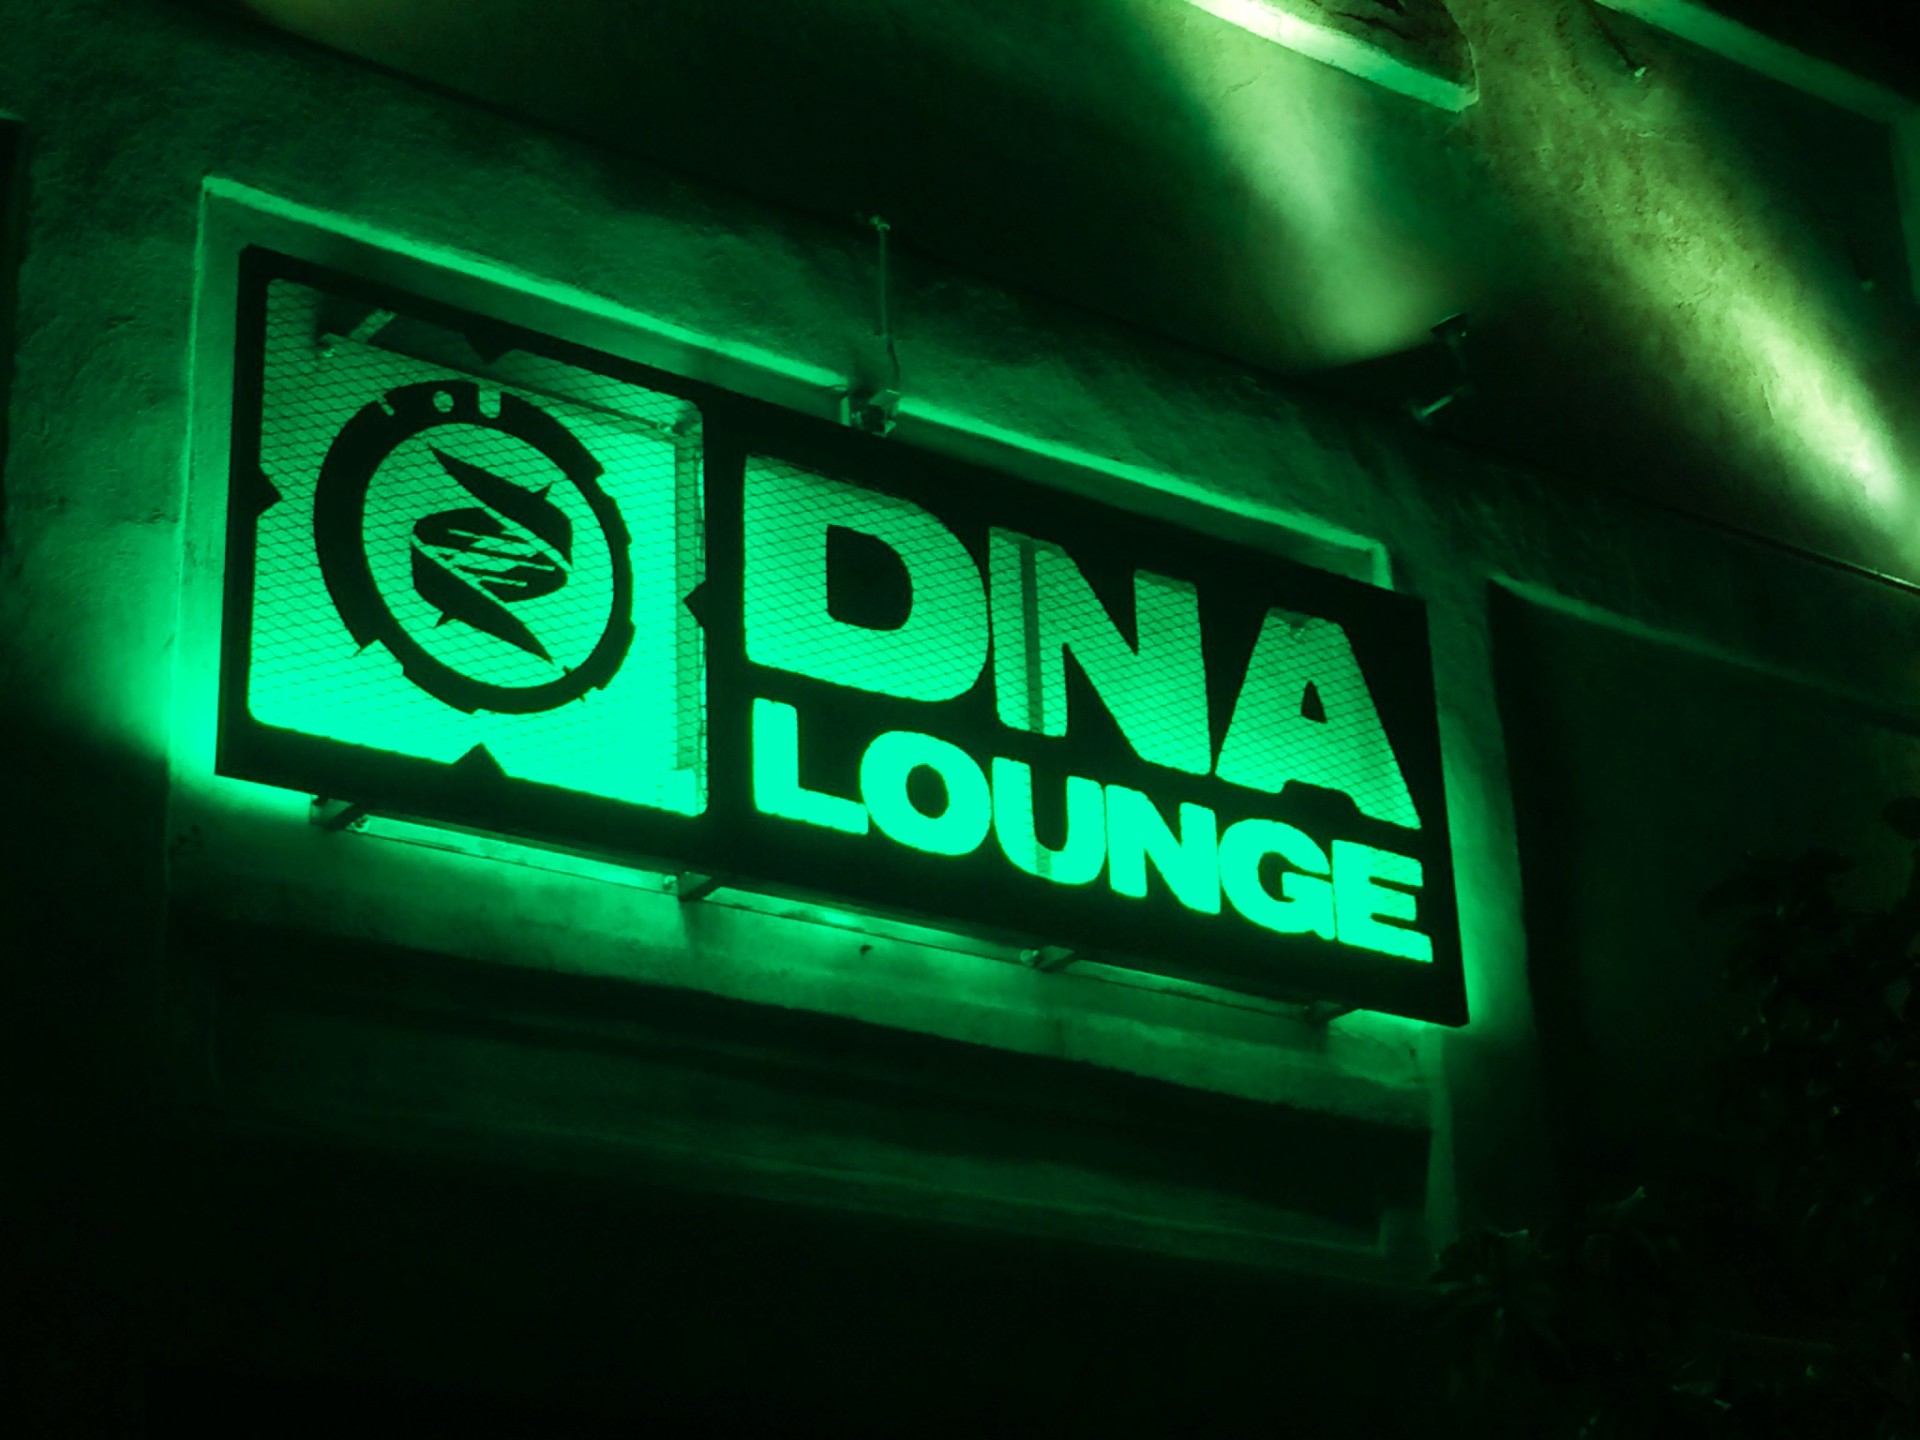 DNA Lounge